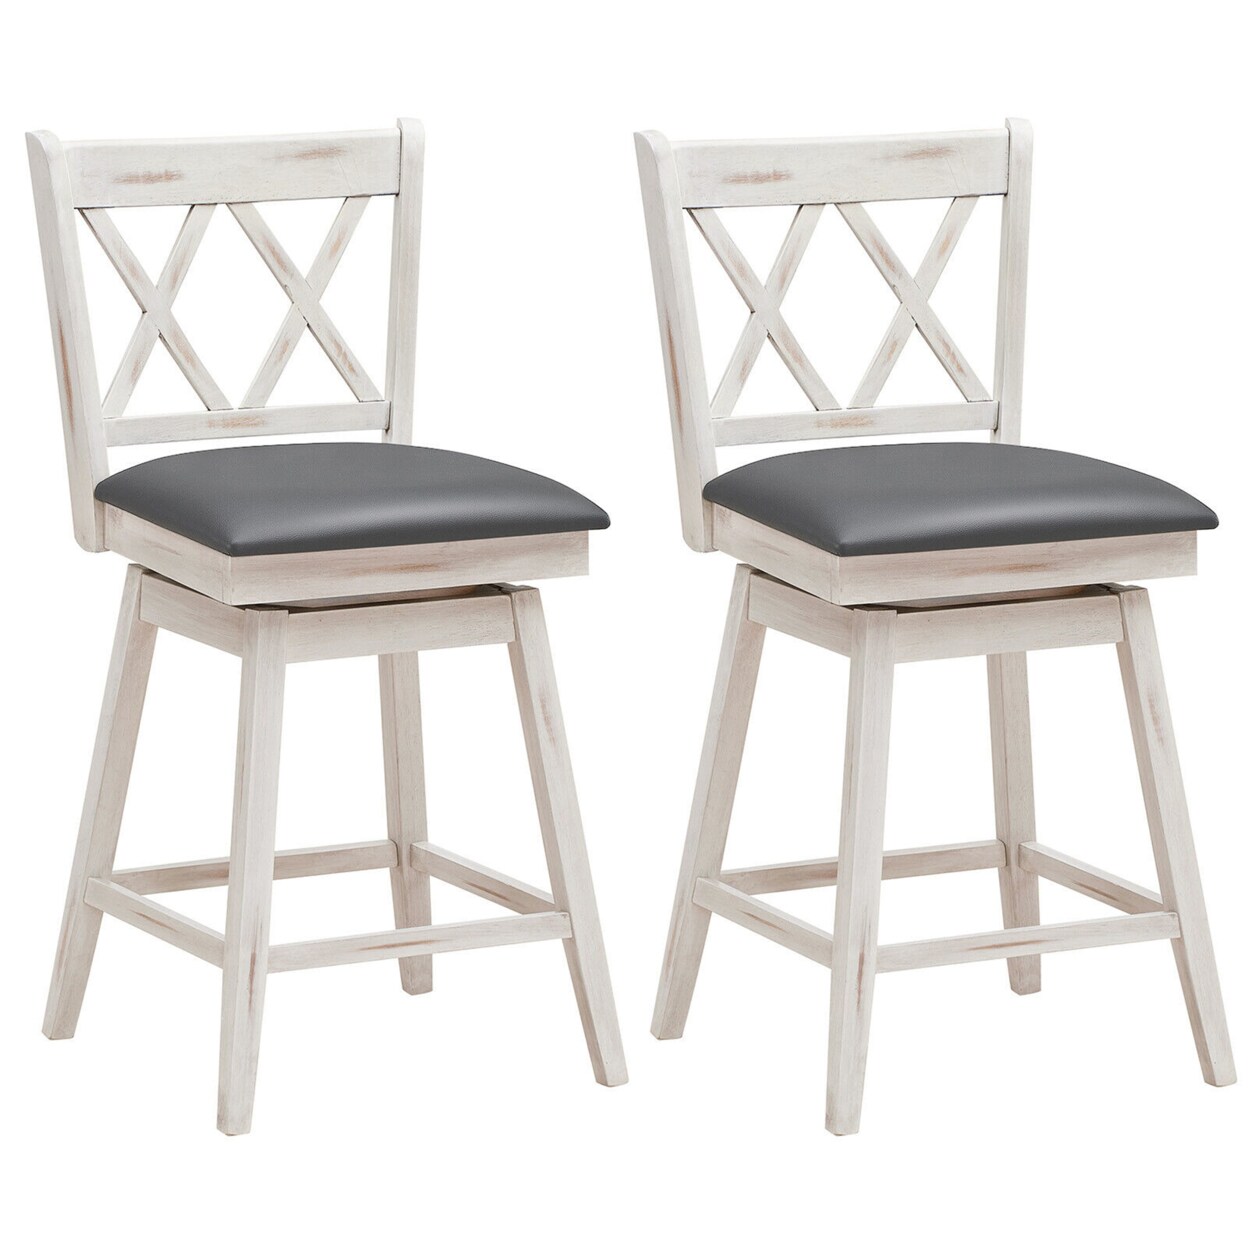 Gymax Set of 2 Barstools Swivel Counter Height Chairs w/Rubber Wood Legs